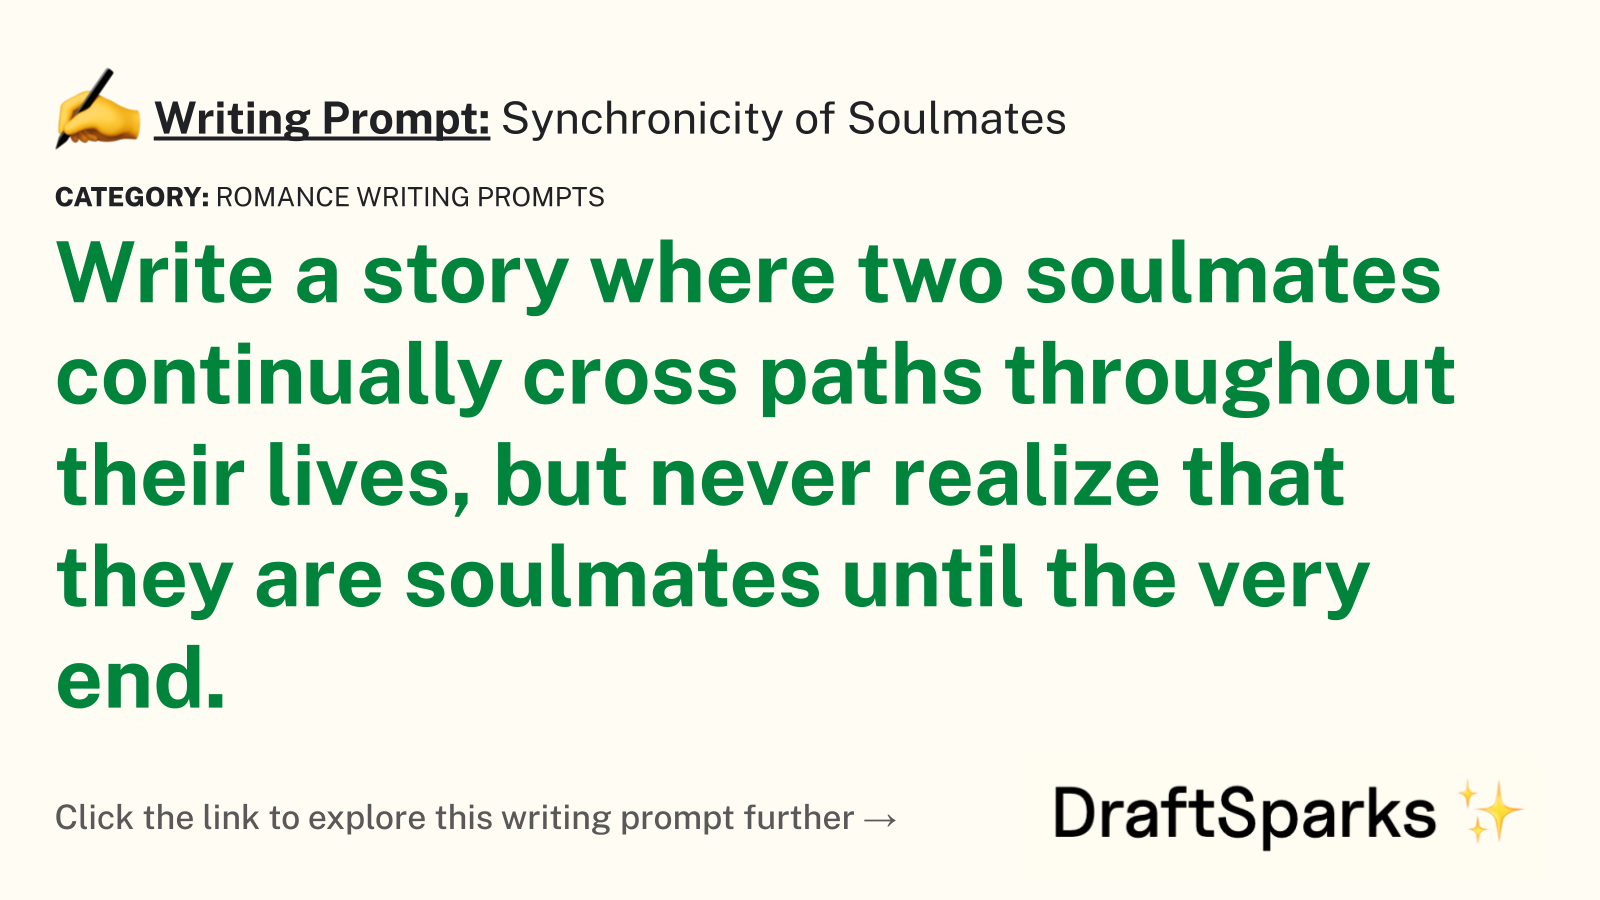 Synchronicity of Soulmates